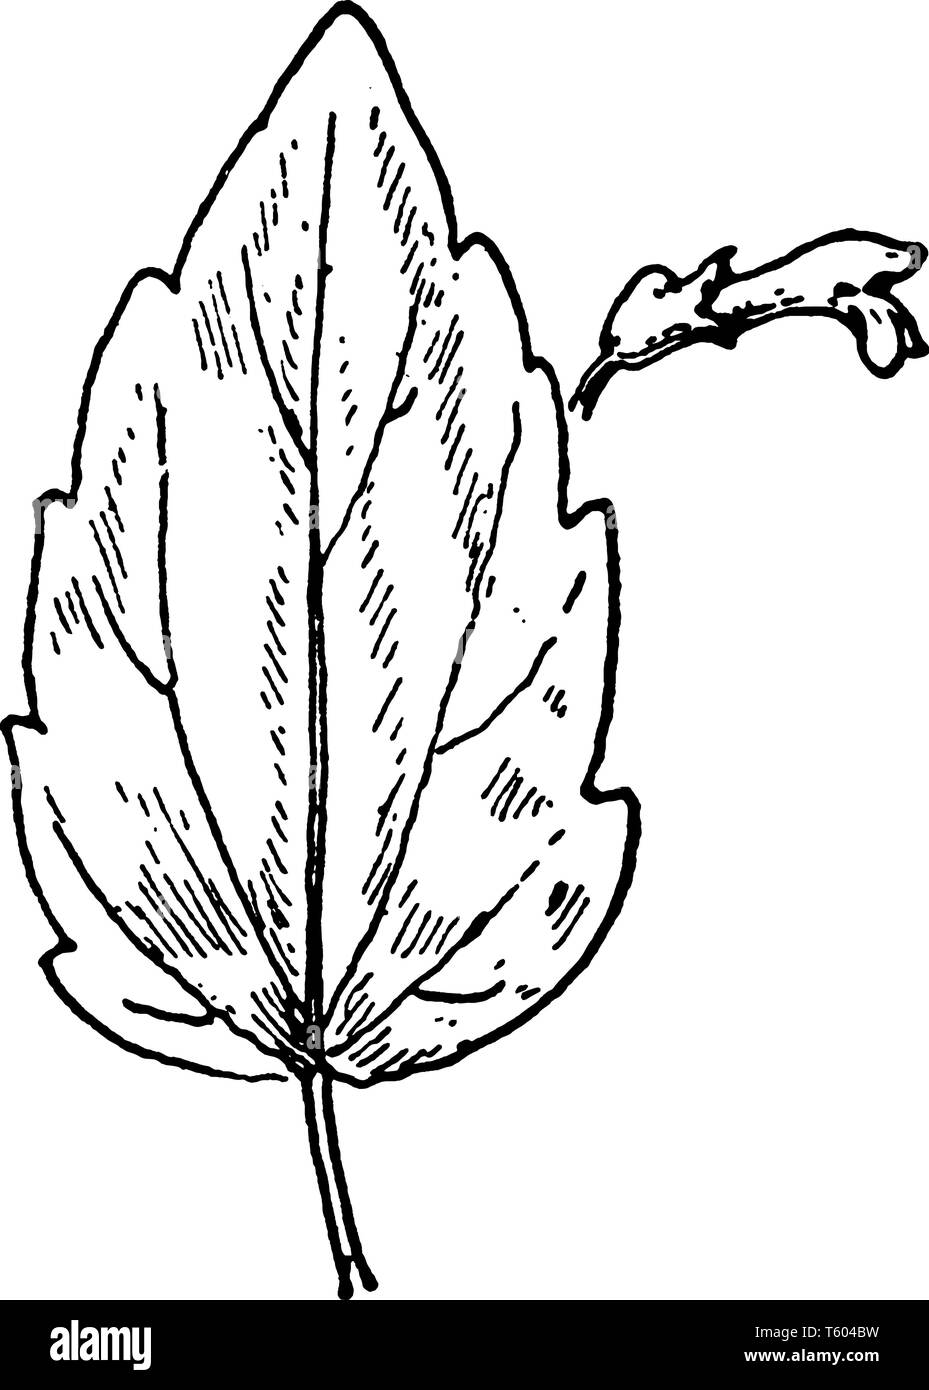 A picture shows the S. nervosa Skullcap leaves and flower. Its leaves are long, narrow, sharp toothed-edges and flowers are purple, bell shaped. Upper Stock Vector